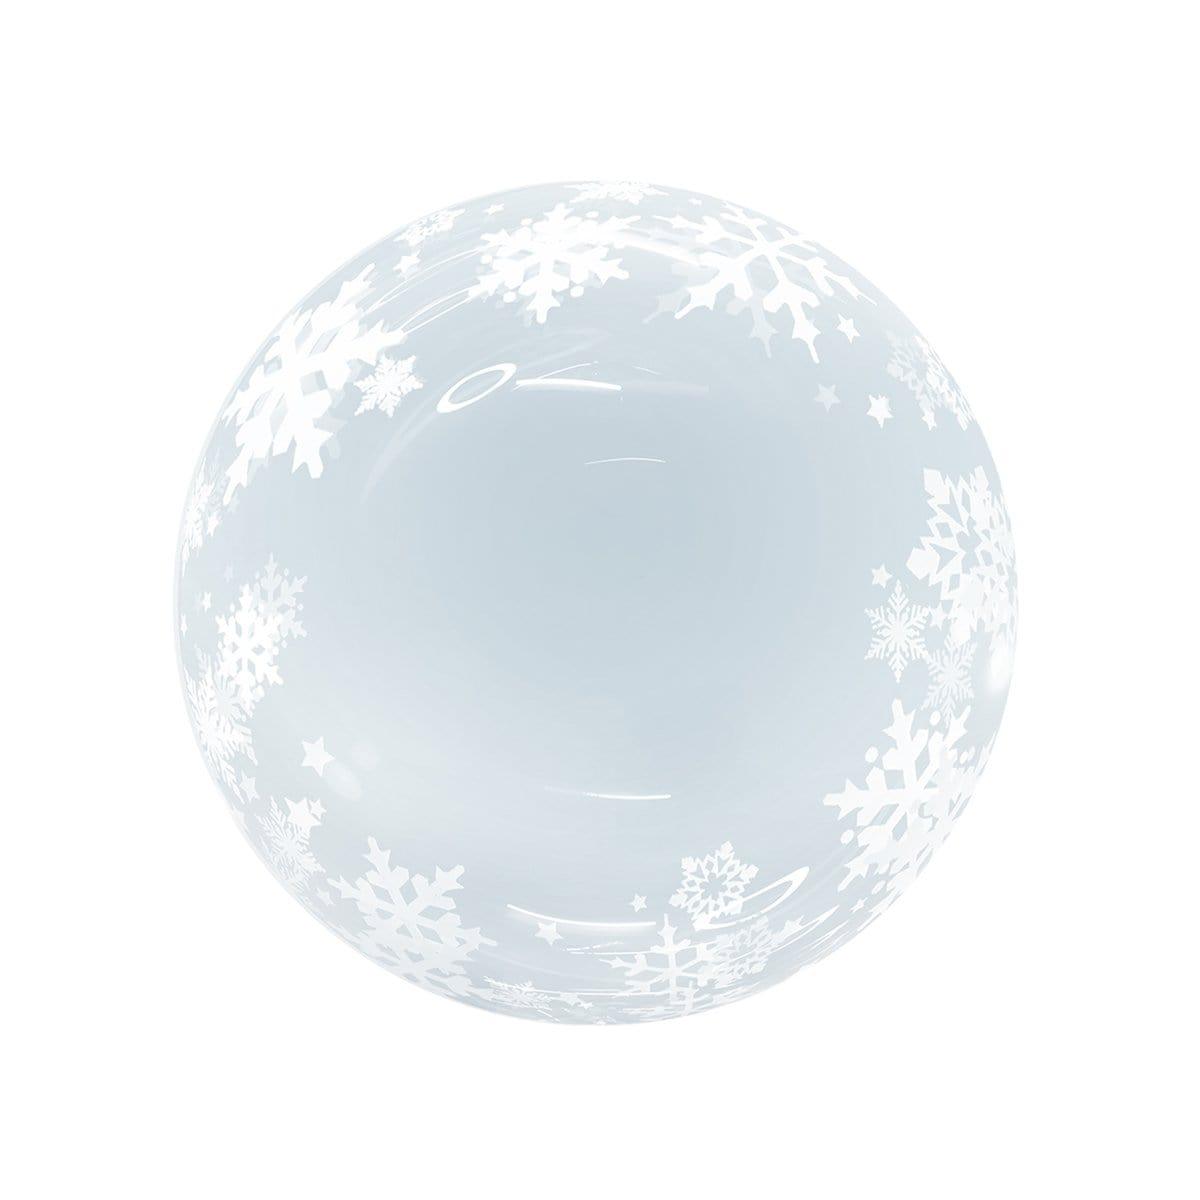 Buy Balloons Bubble Balloon, Snowflakes, 18 Inches sold at Party Expert